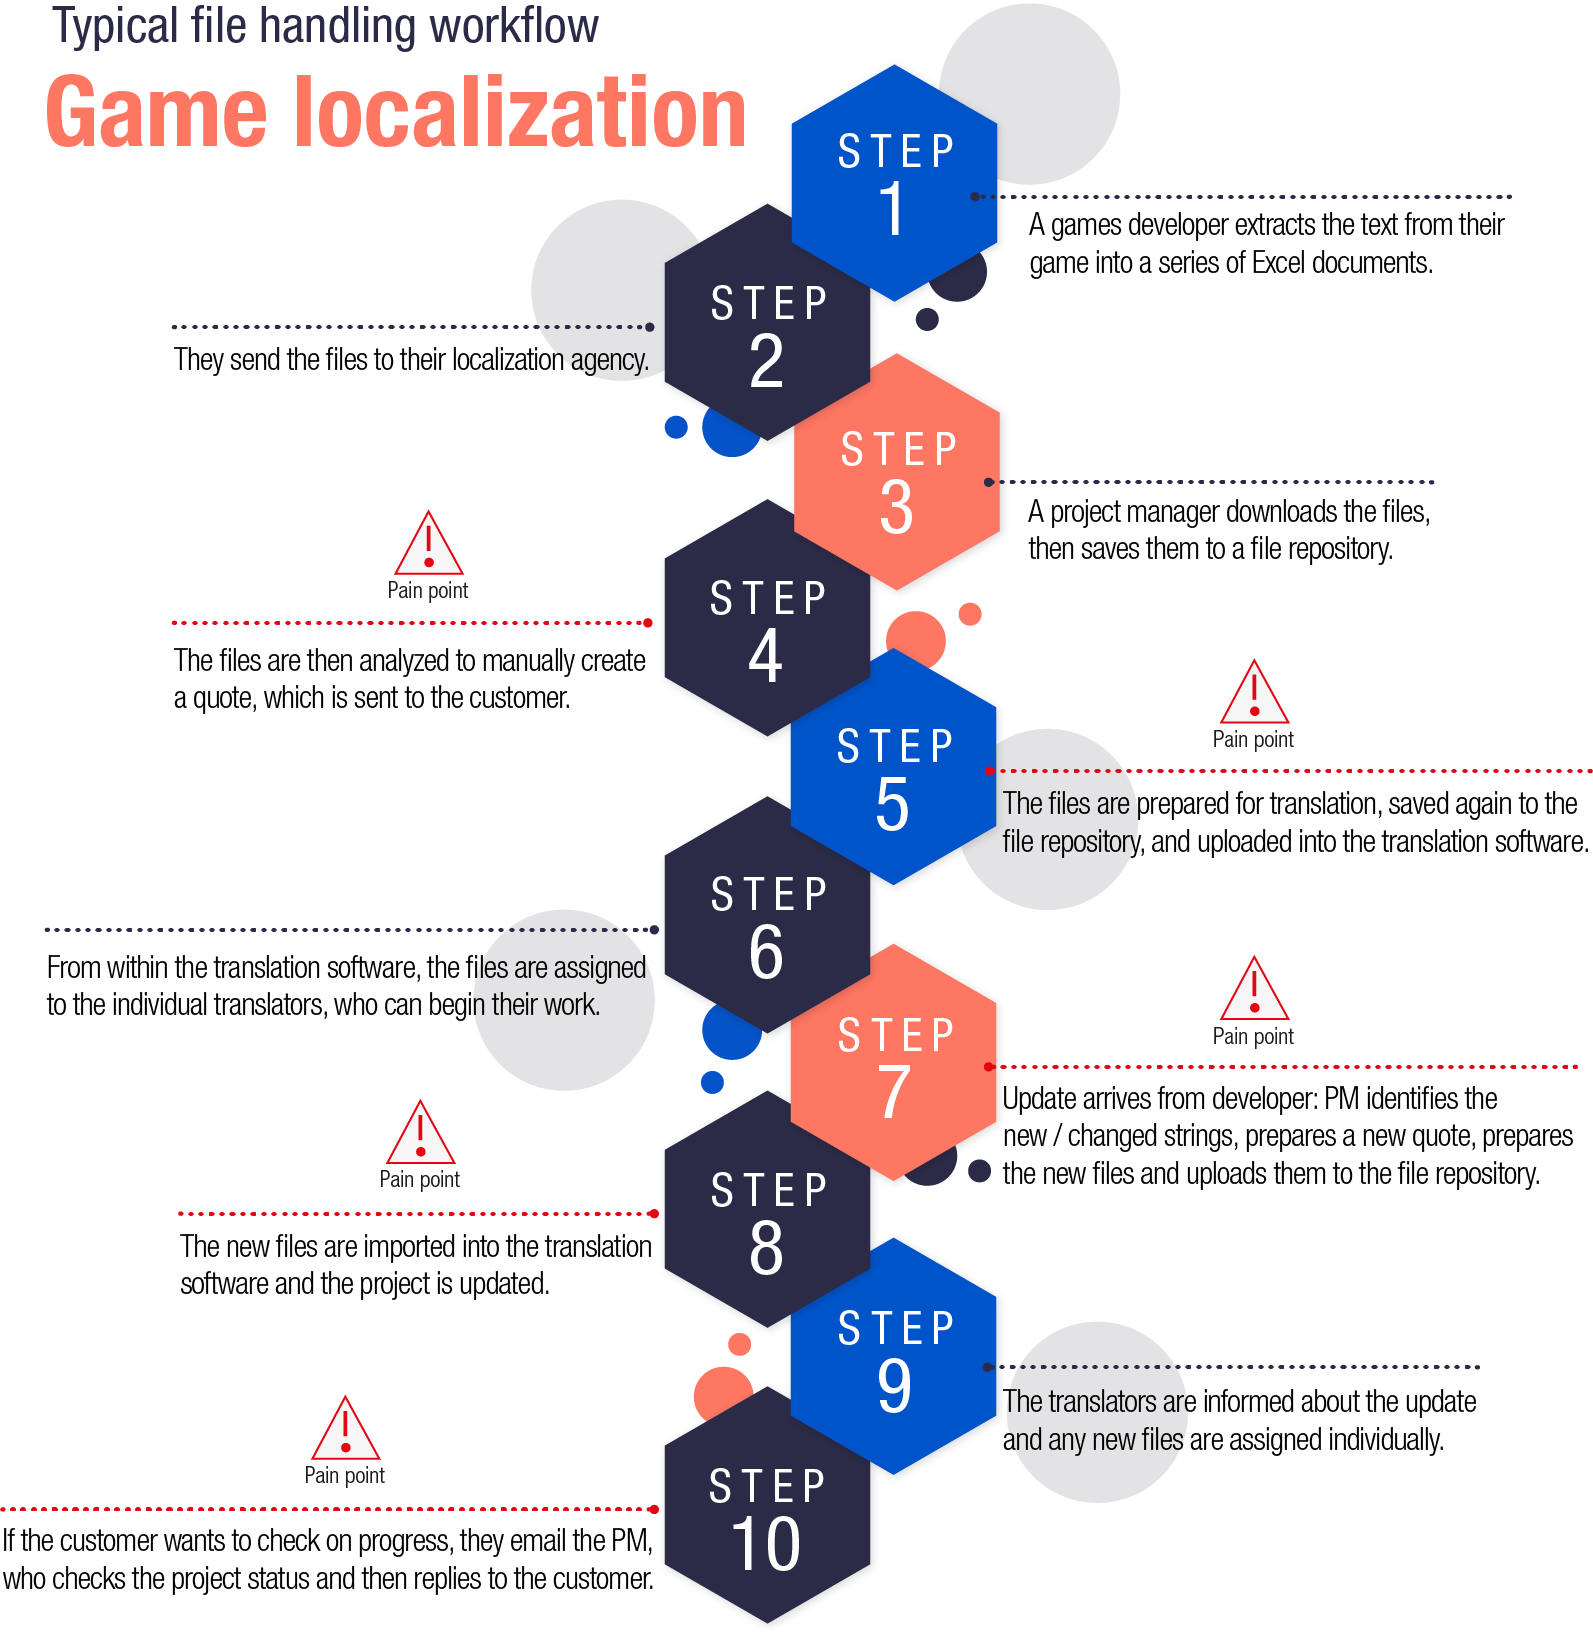 Why manual file management is creating a bottleneck in your game localization workflow